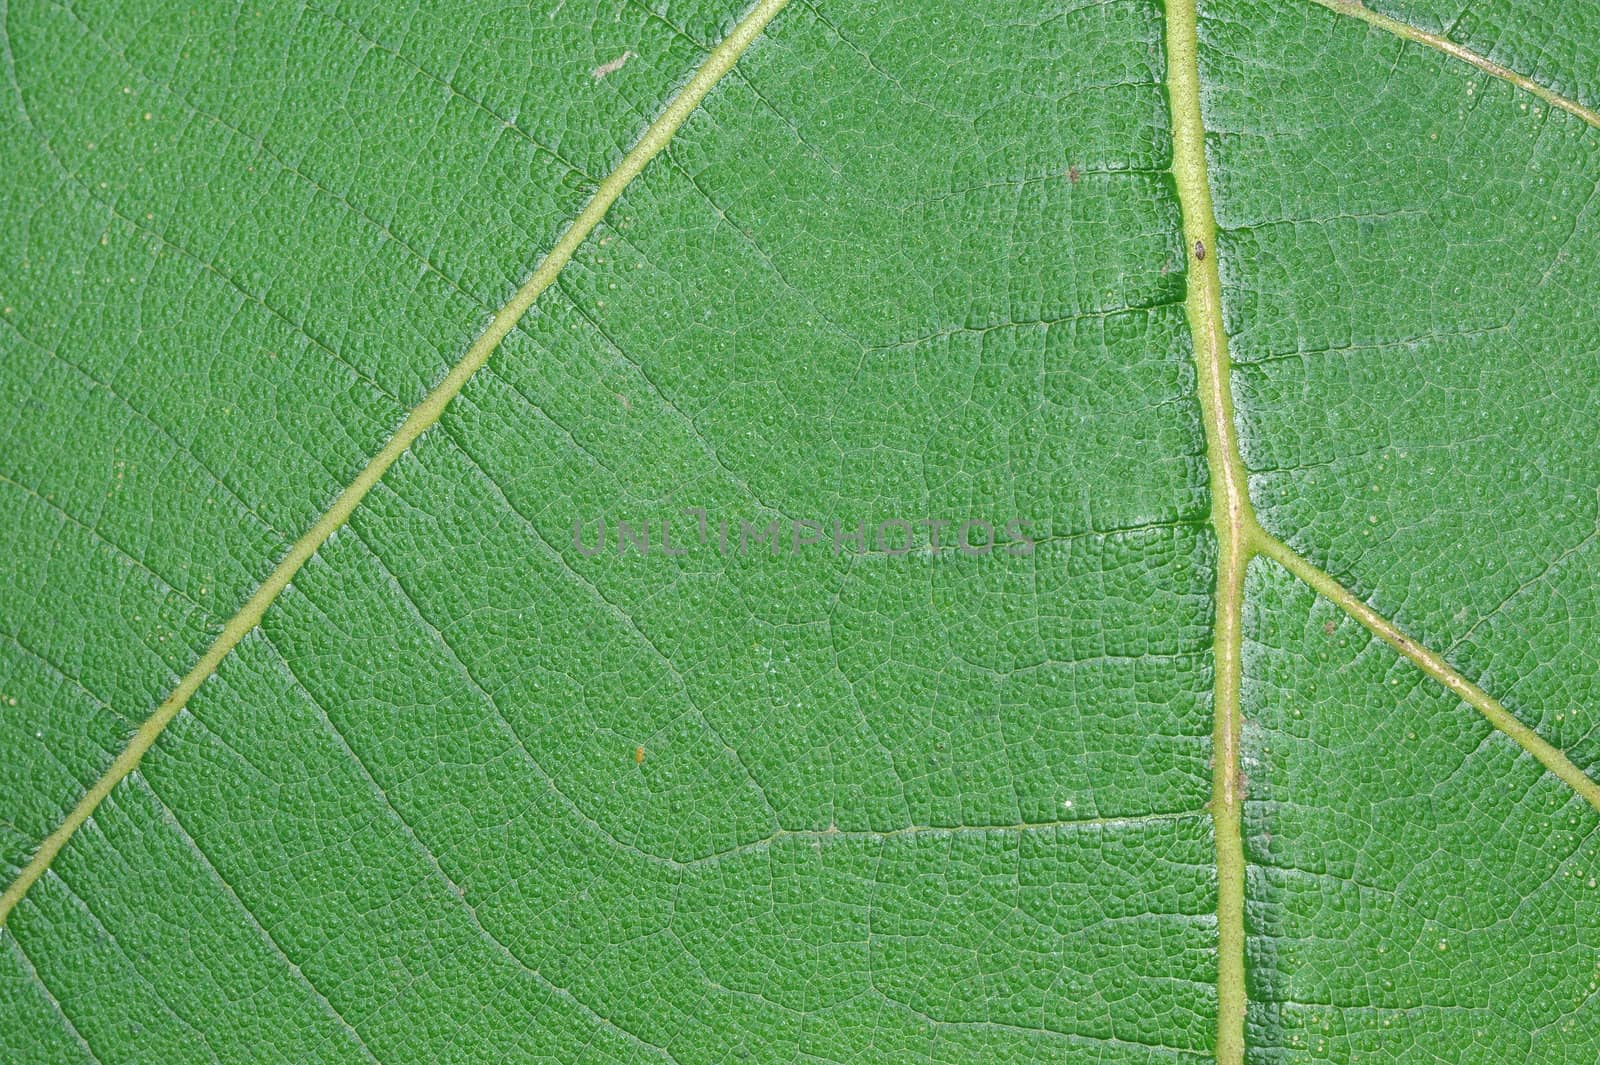 Extreme macro of green leaf with veins like a tree by sommai